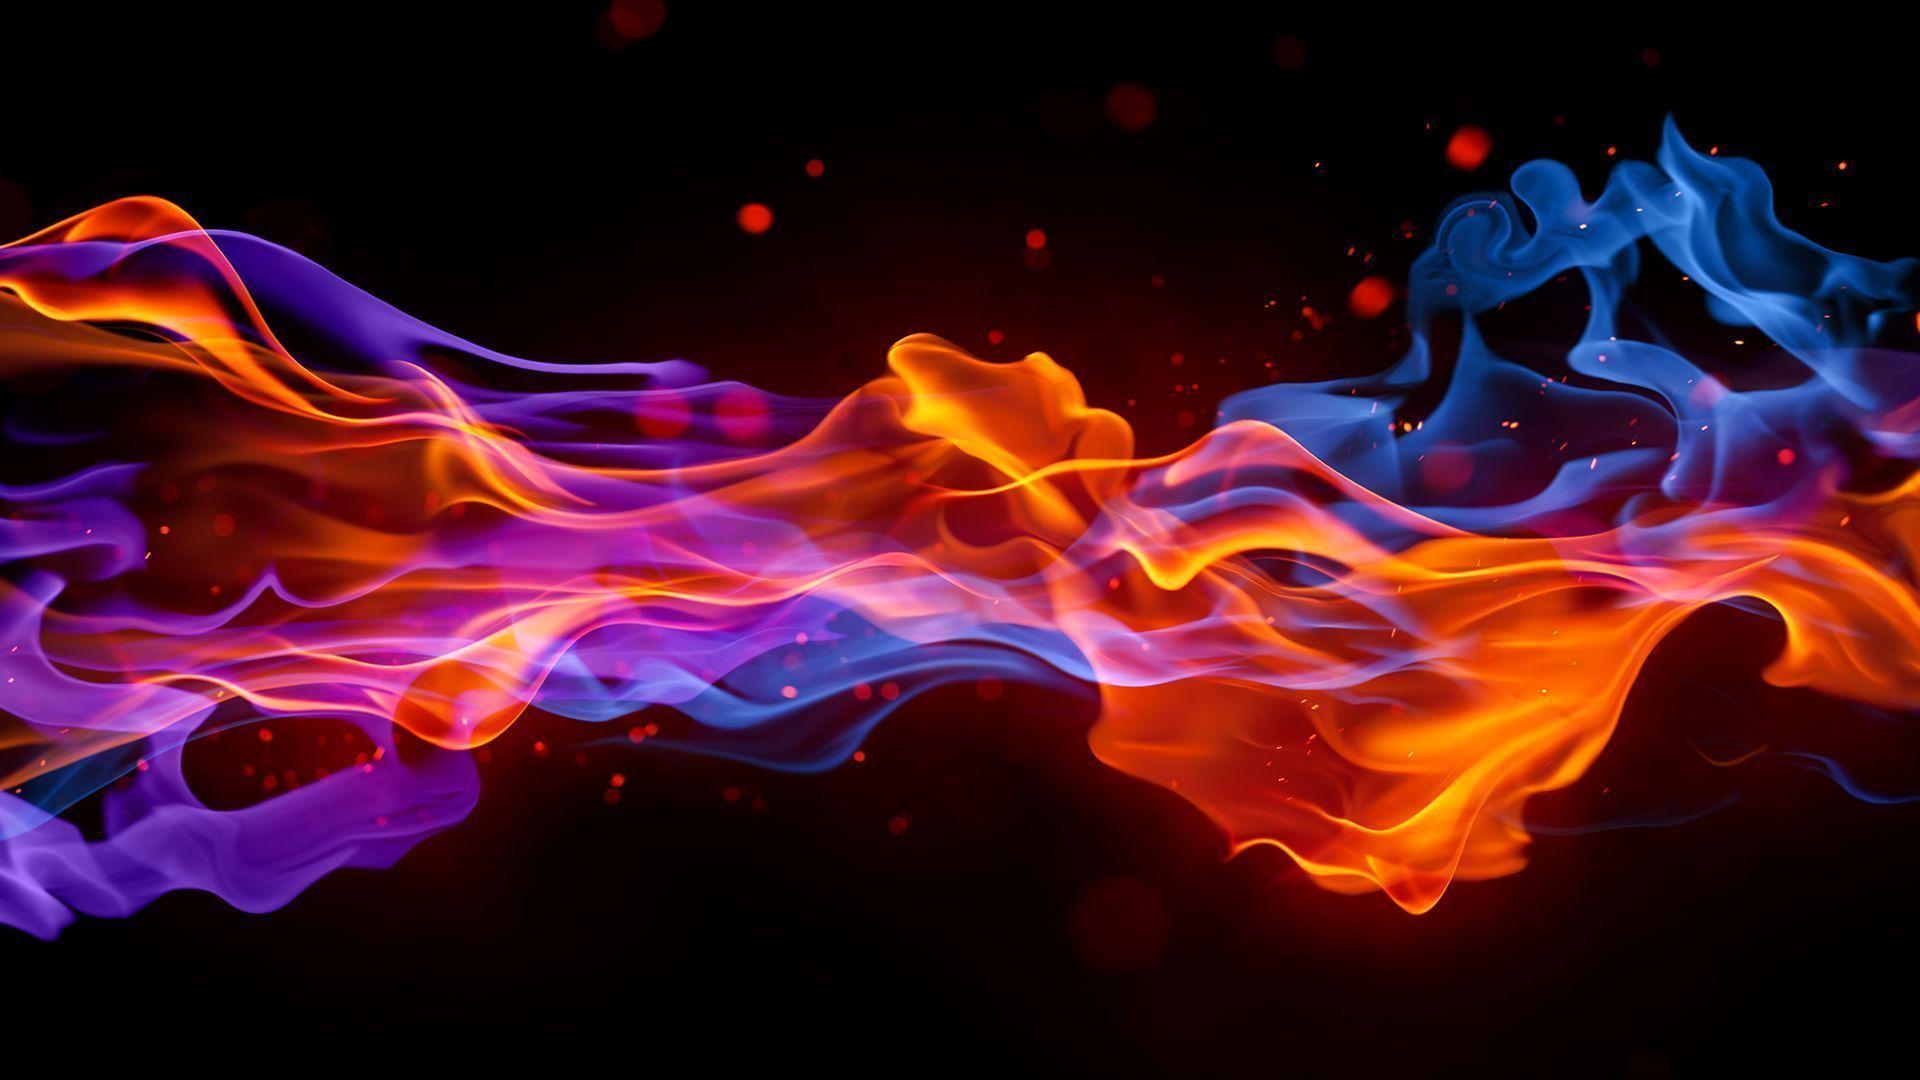 Blue And Red Fire Wallpaper Picture 187 Wallpaper. High